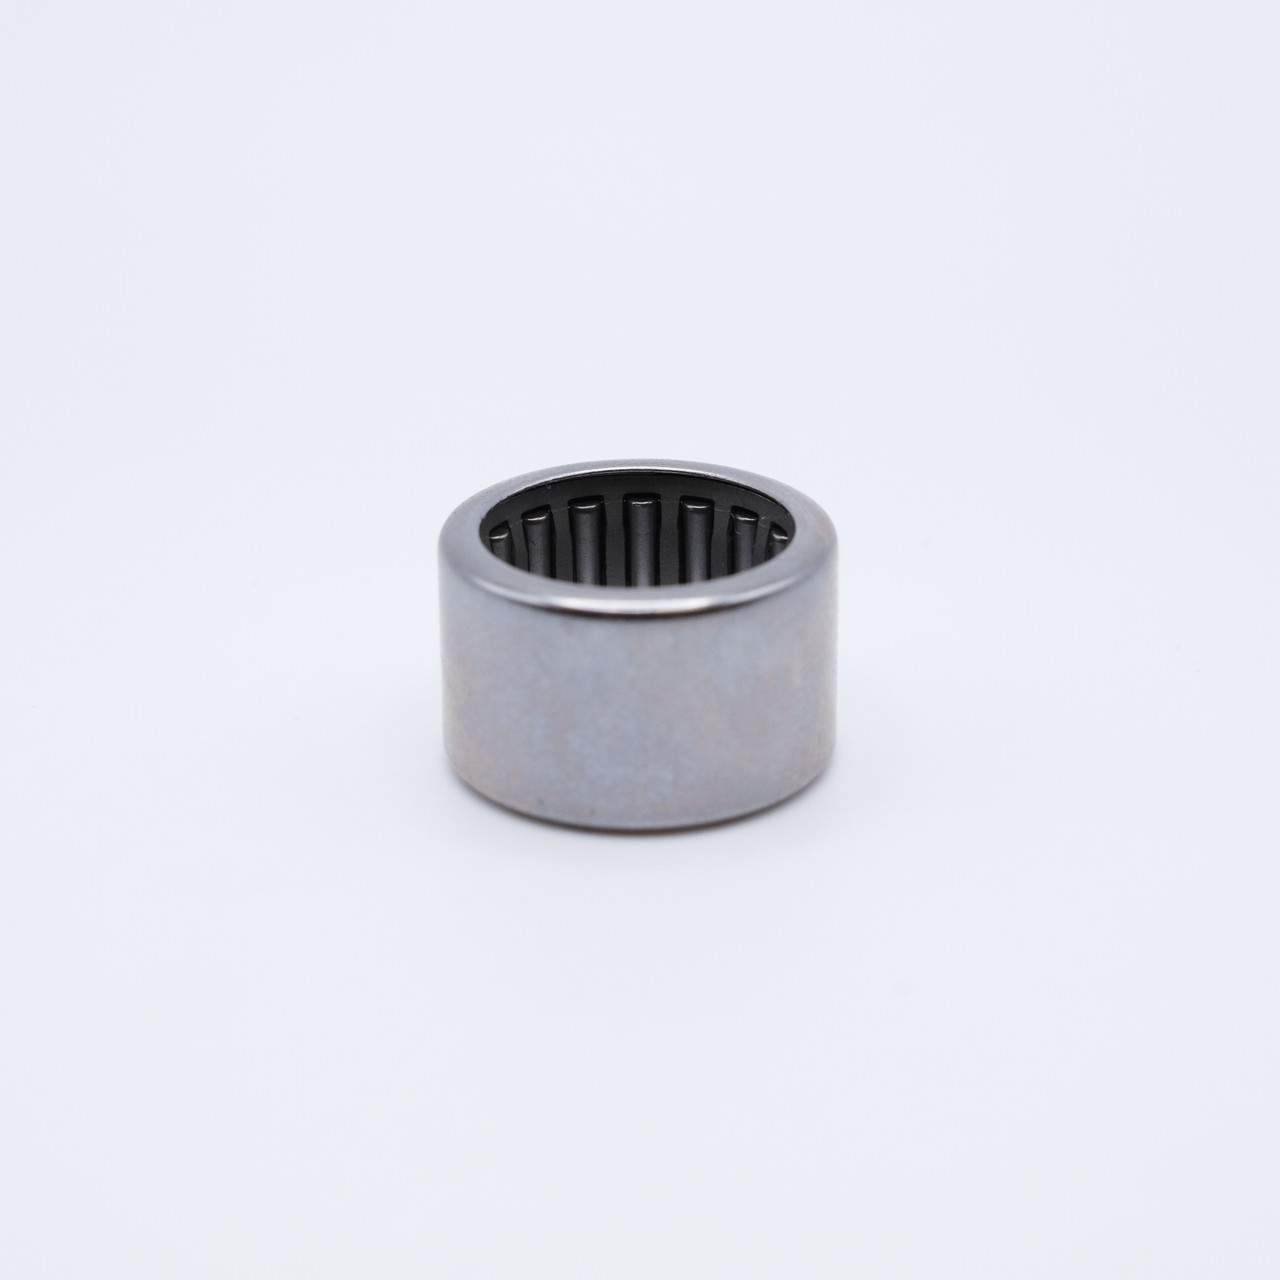 HK0609 Needle Roller Bearing 6x10x9mm Side View